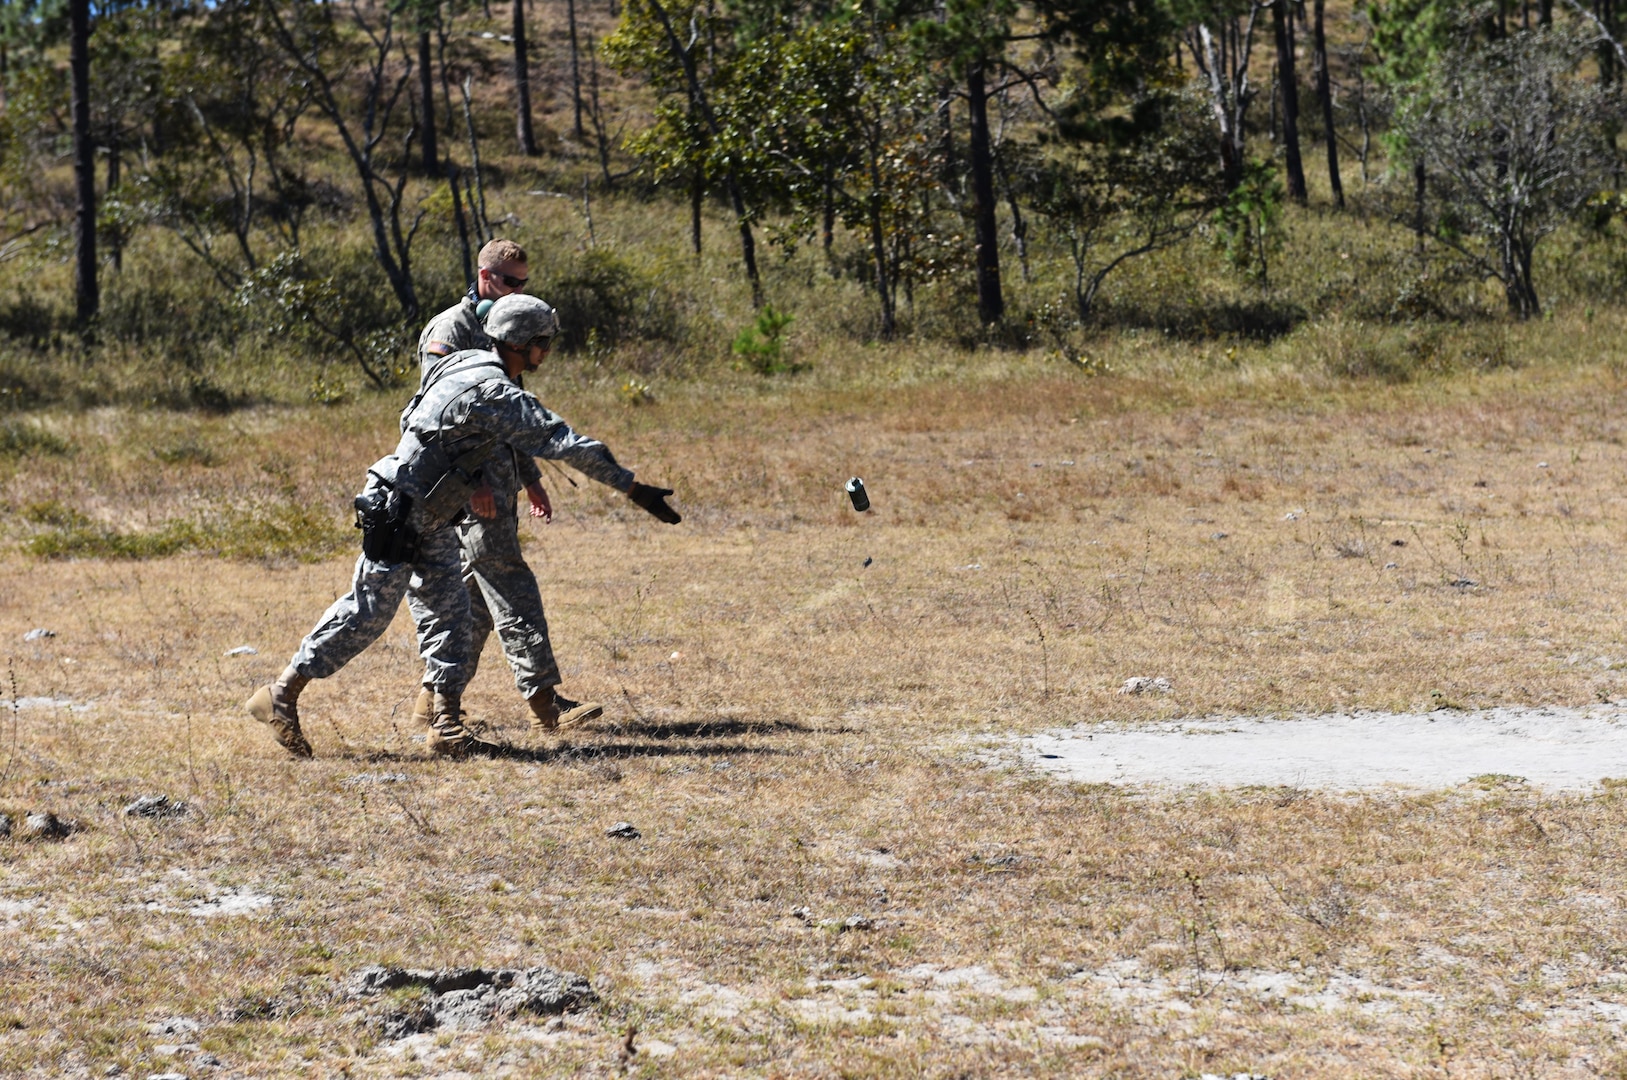 A service member assigned to Joint Task Force- Bravo’s Joint Security Forces throws a smoke canister that will mark the landing zone for a UH-60 helicopter as part of a joint Medical Evacuation training exercise between JSF and the 1st Battalion, 228th Aviation Regiment, near Soto Cano Air Base, Honduras, Jan. 18, 2017. 